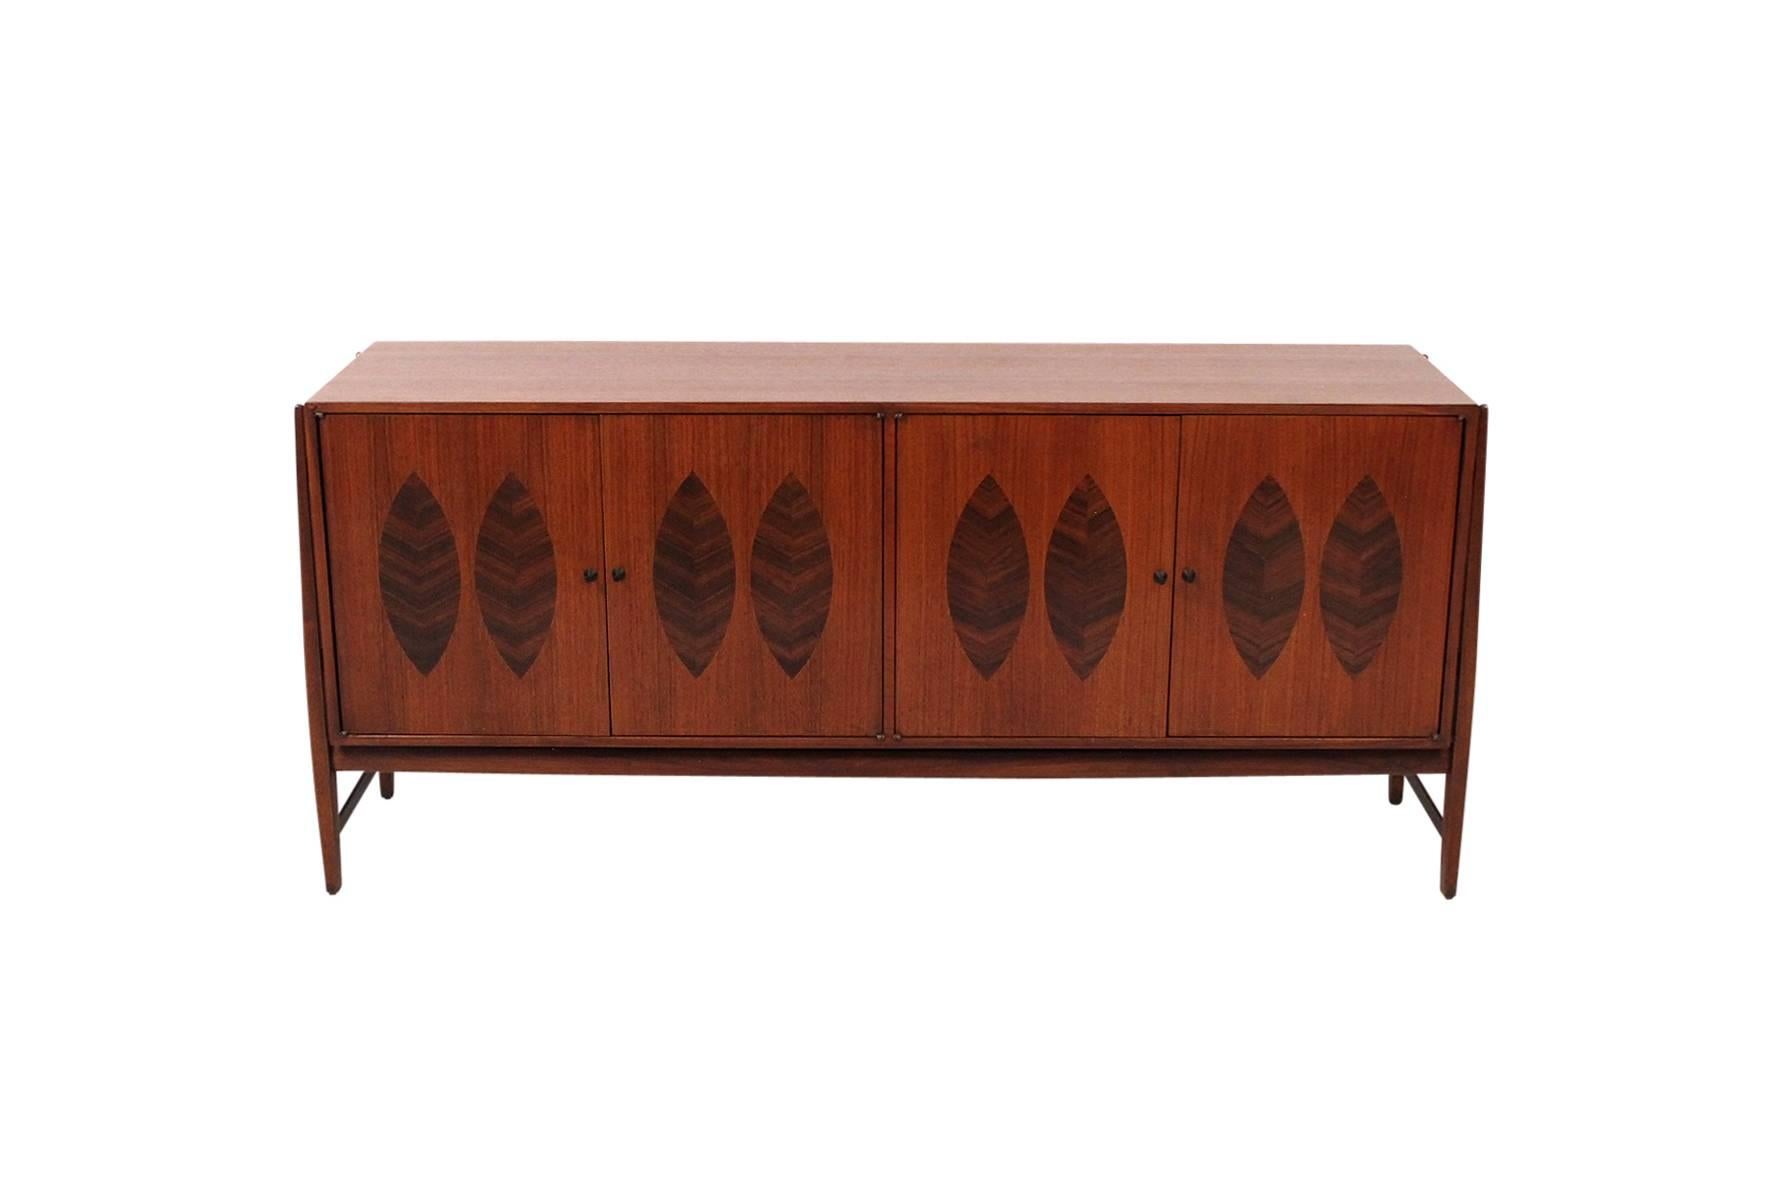 Credenza or cabinet designed by Kipp Stewart for the American Design Foundation and Calvin Furniture. Cabinet features four doors with leaf inspired rosewood inlays. Well constructed and styled cabinet.